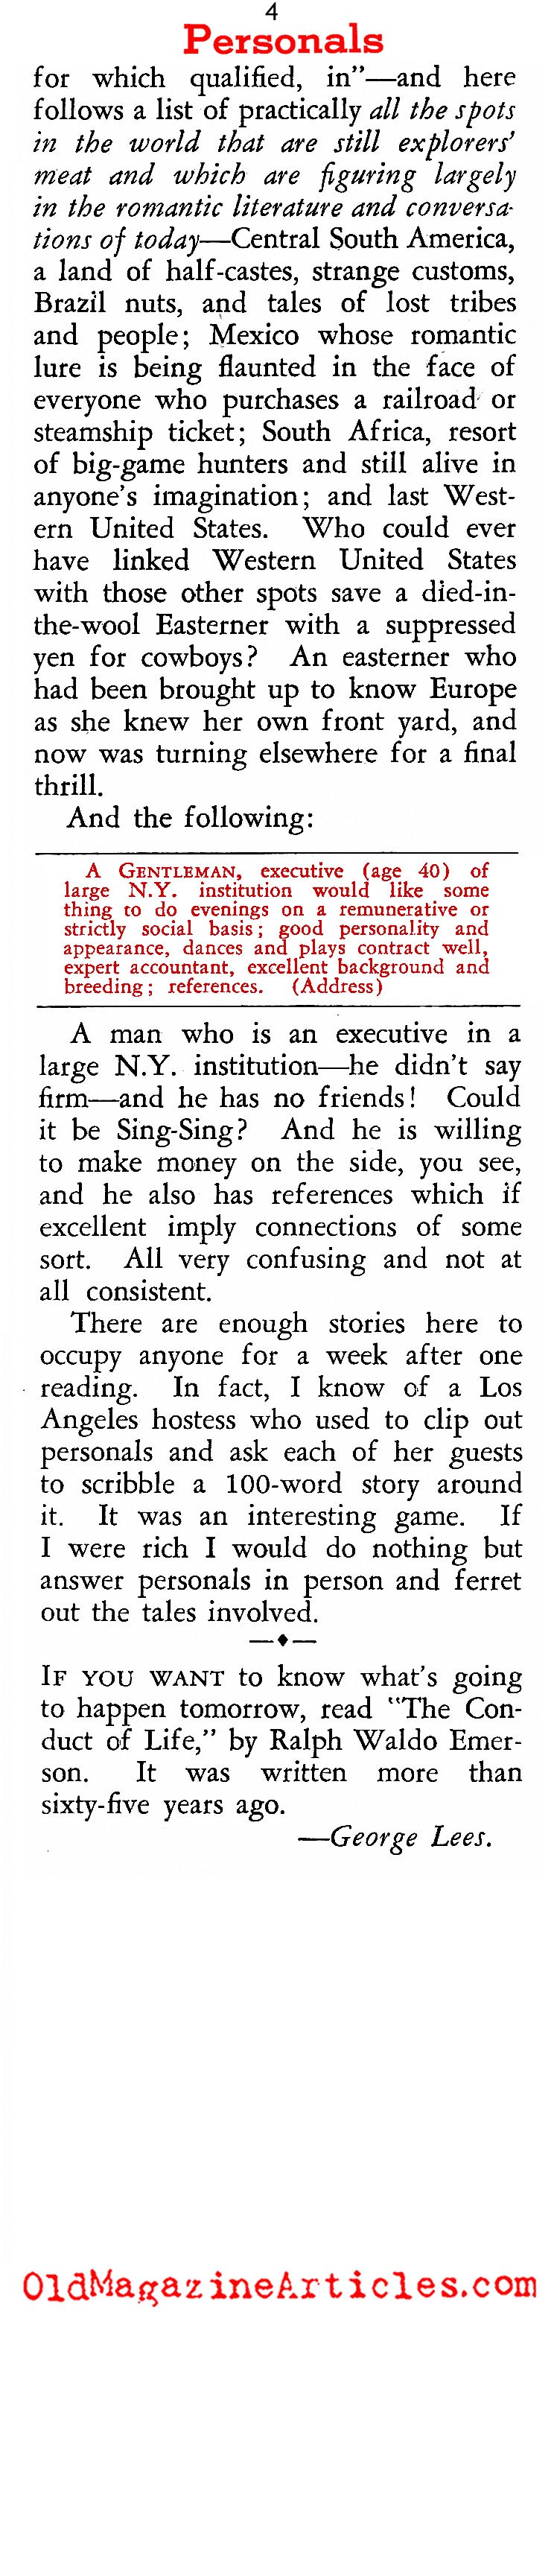 The Personal Ads (Rob Wagner's Script, 1935)